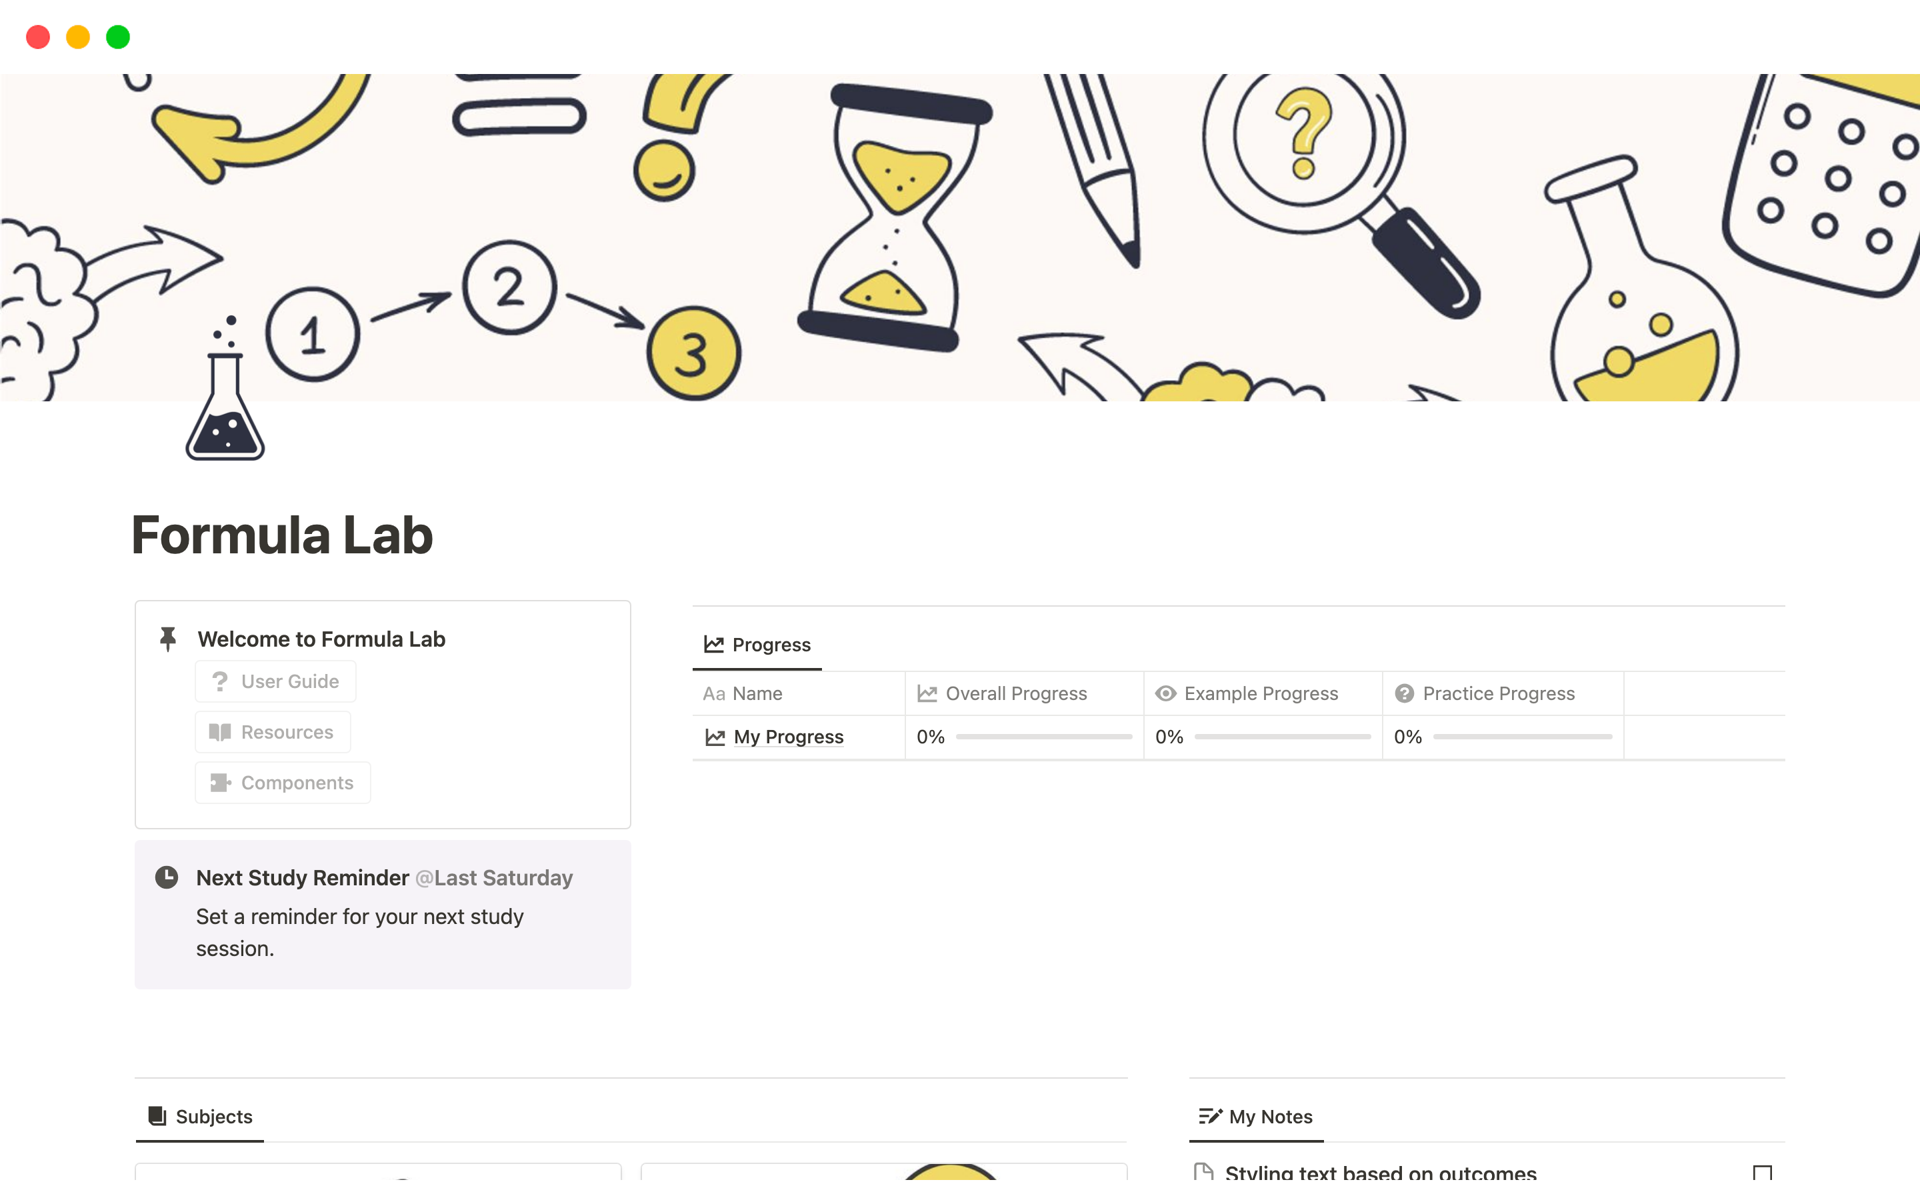 Formula Lab is a study guide to experiment, learn, and discover the logic behind Notion formulas.